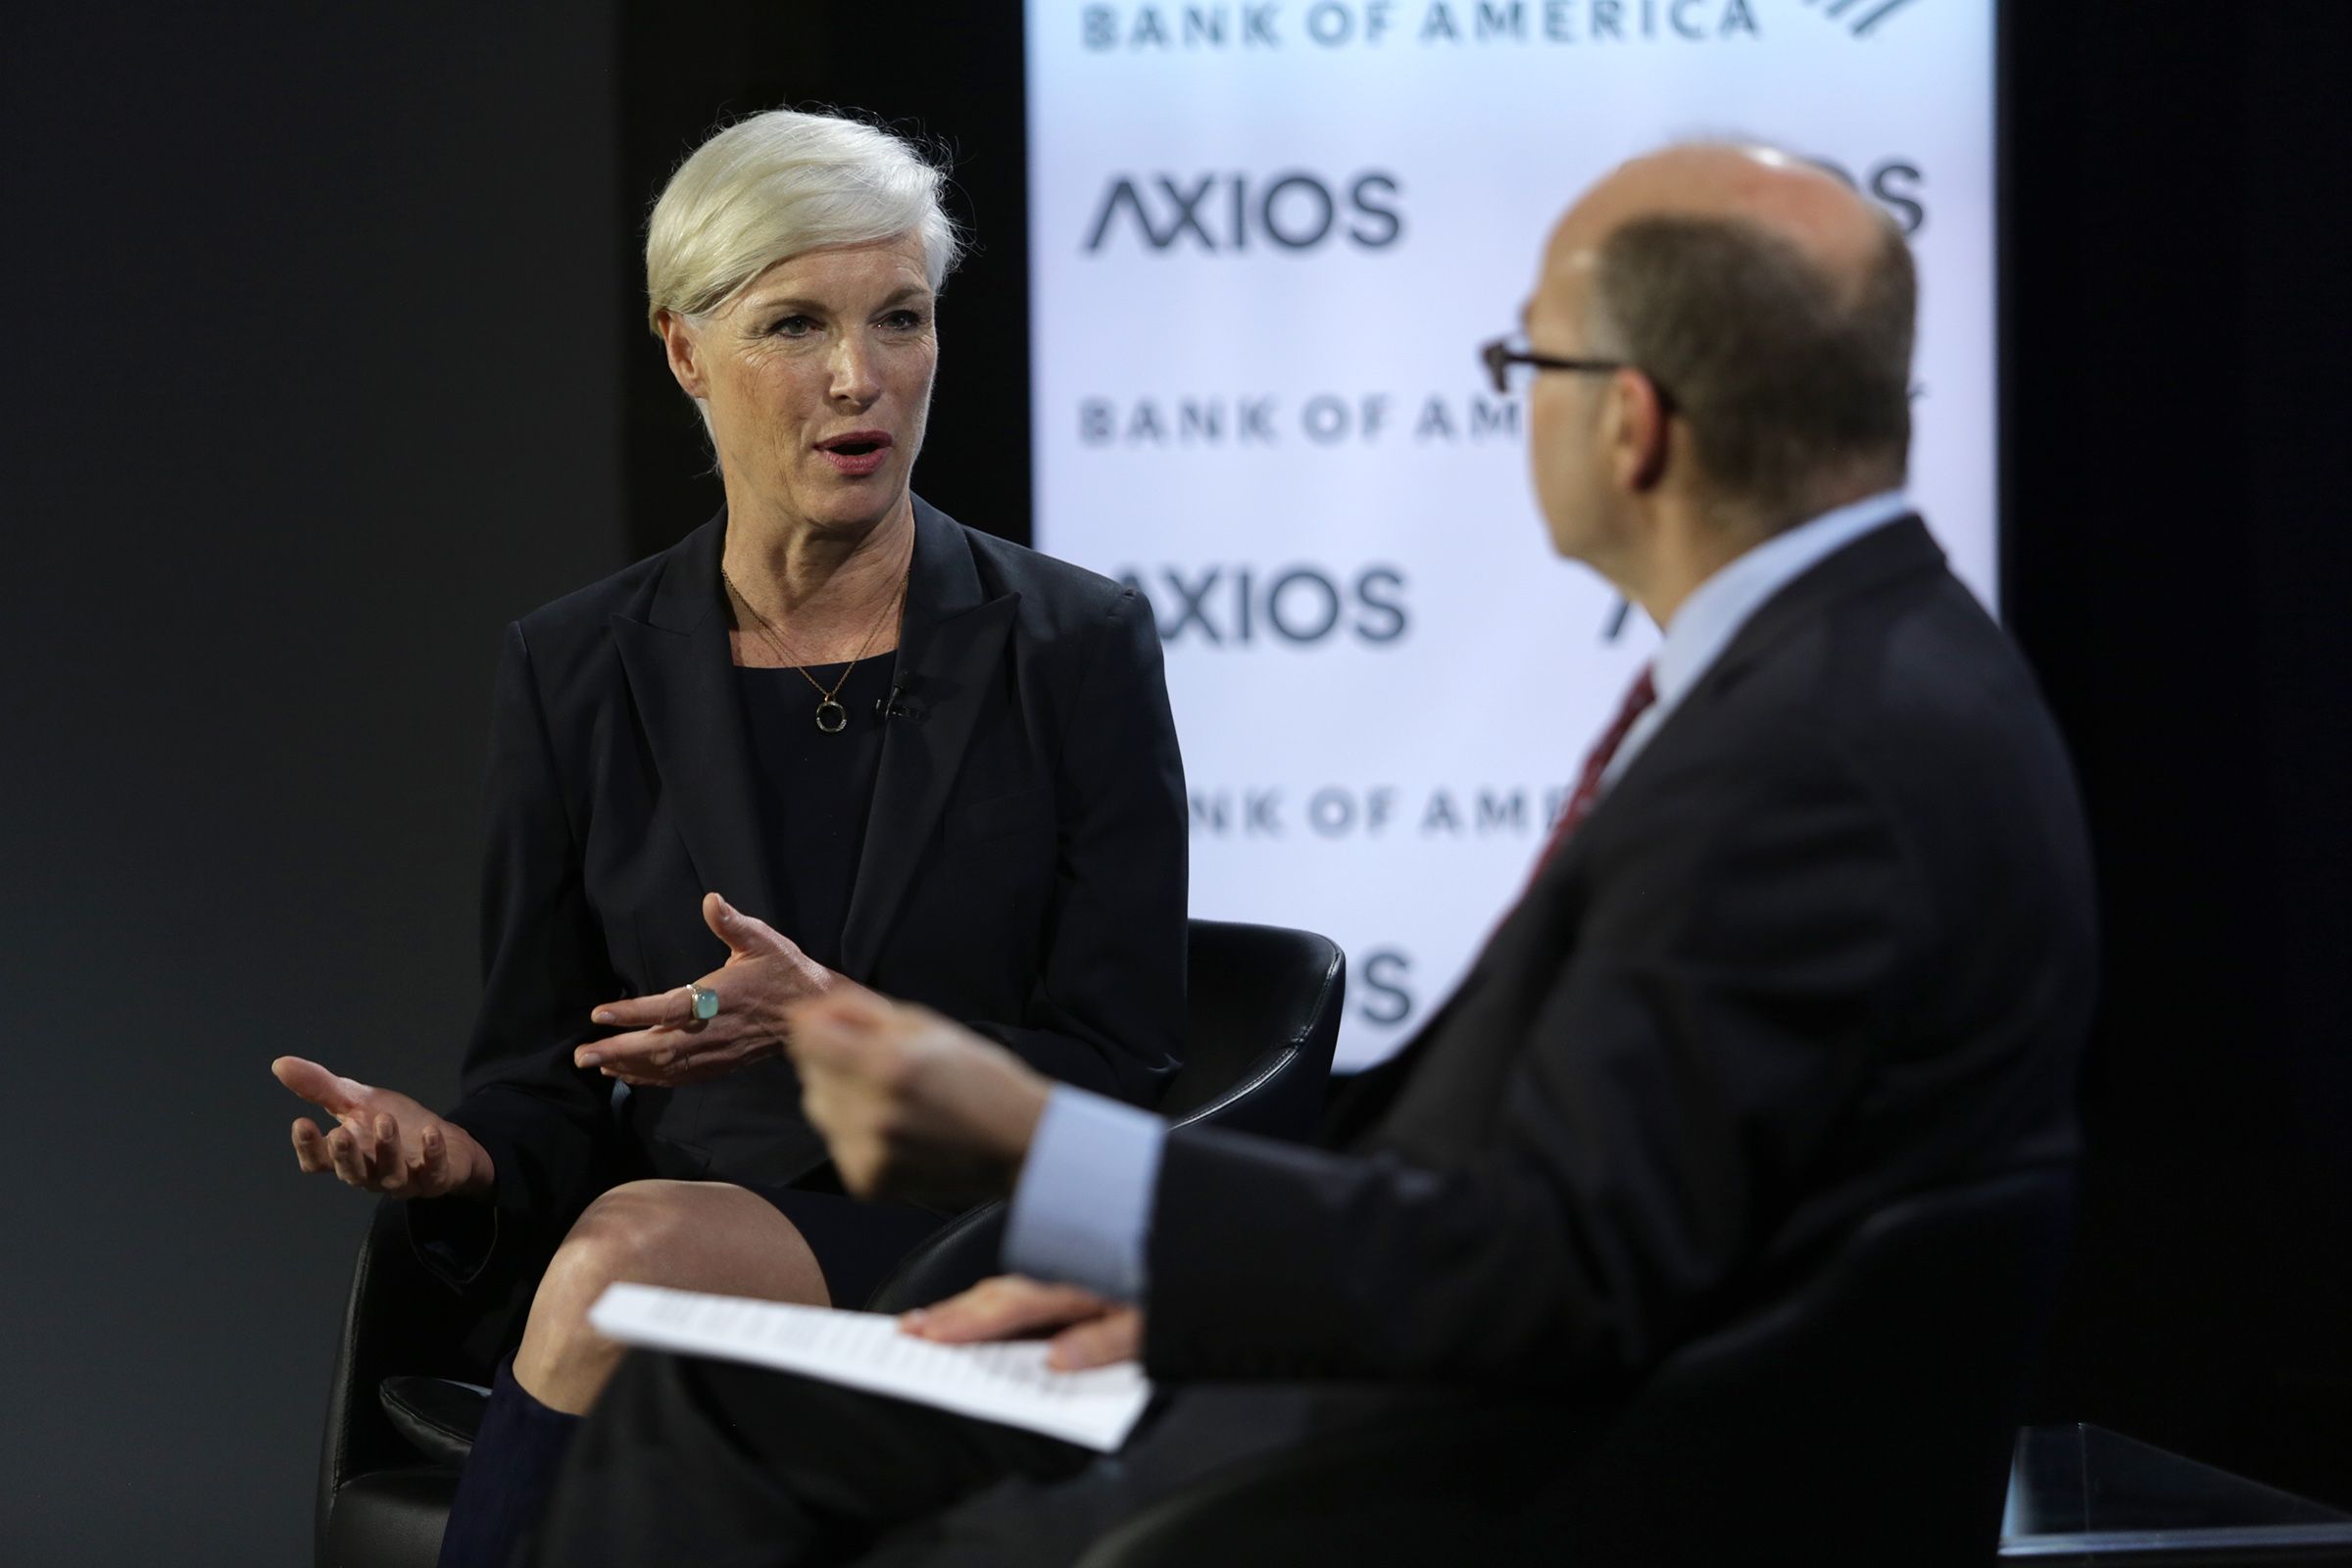 Cecile Richards and Mike Allen sit on the Axios stage.